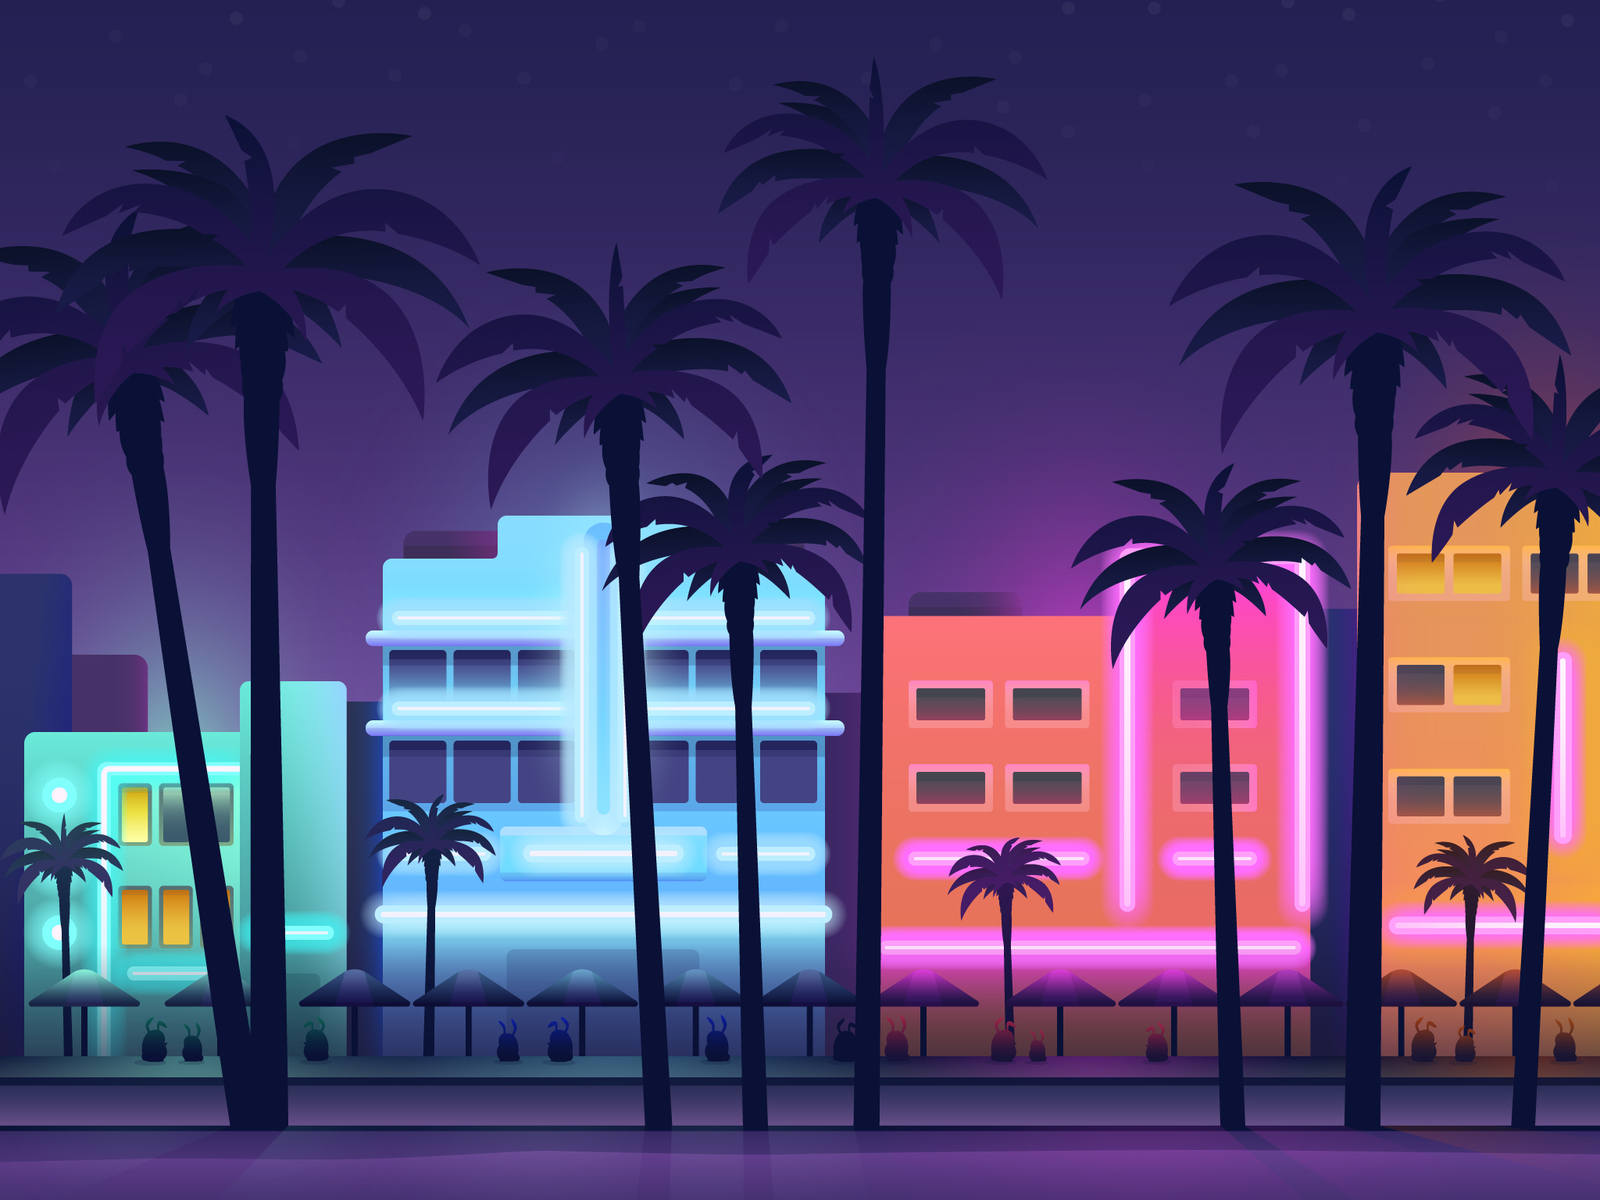 South Beach, Miami for Hopper by Mike Nudelman on Dribbble